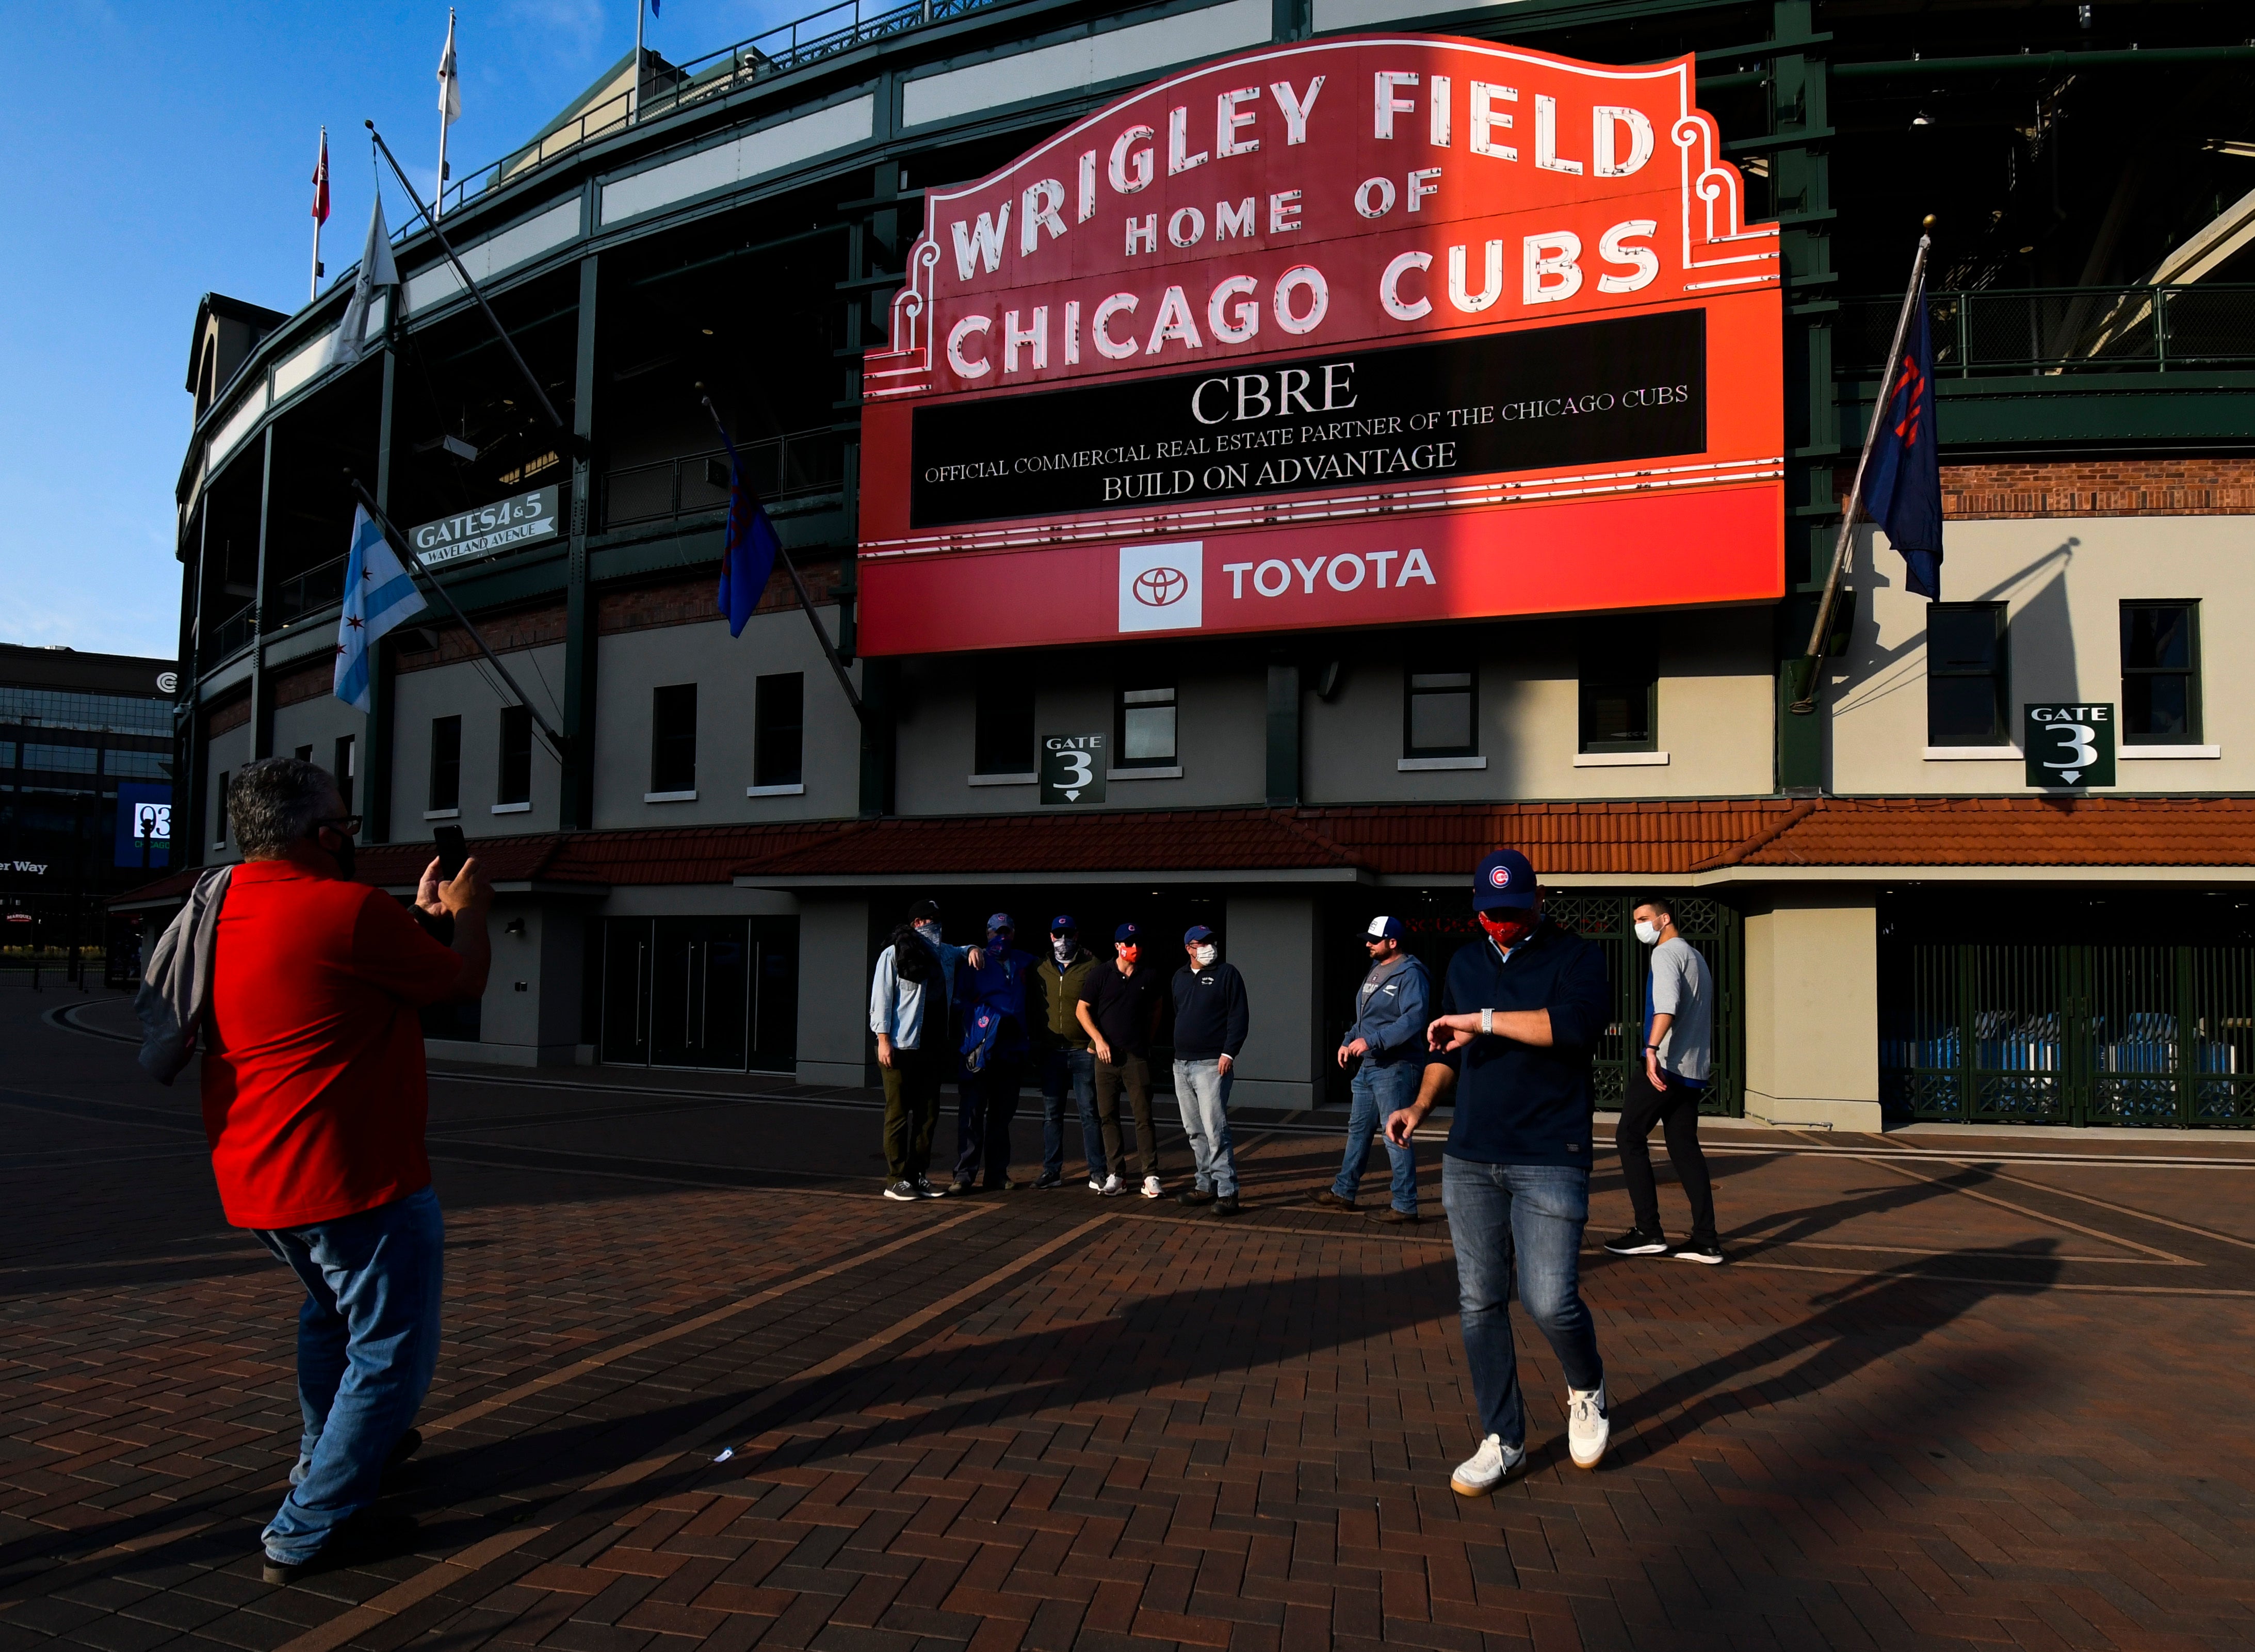 The incident unfolded after the man came into contact with a “foreign substance” next to Wrigley Field.